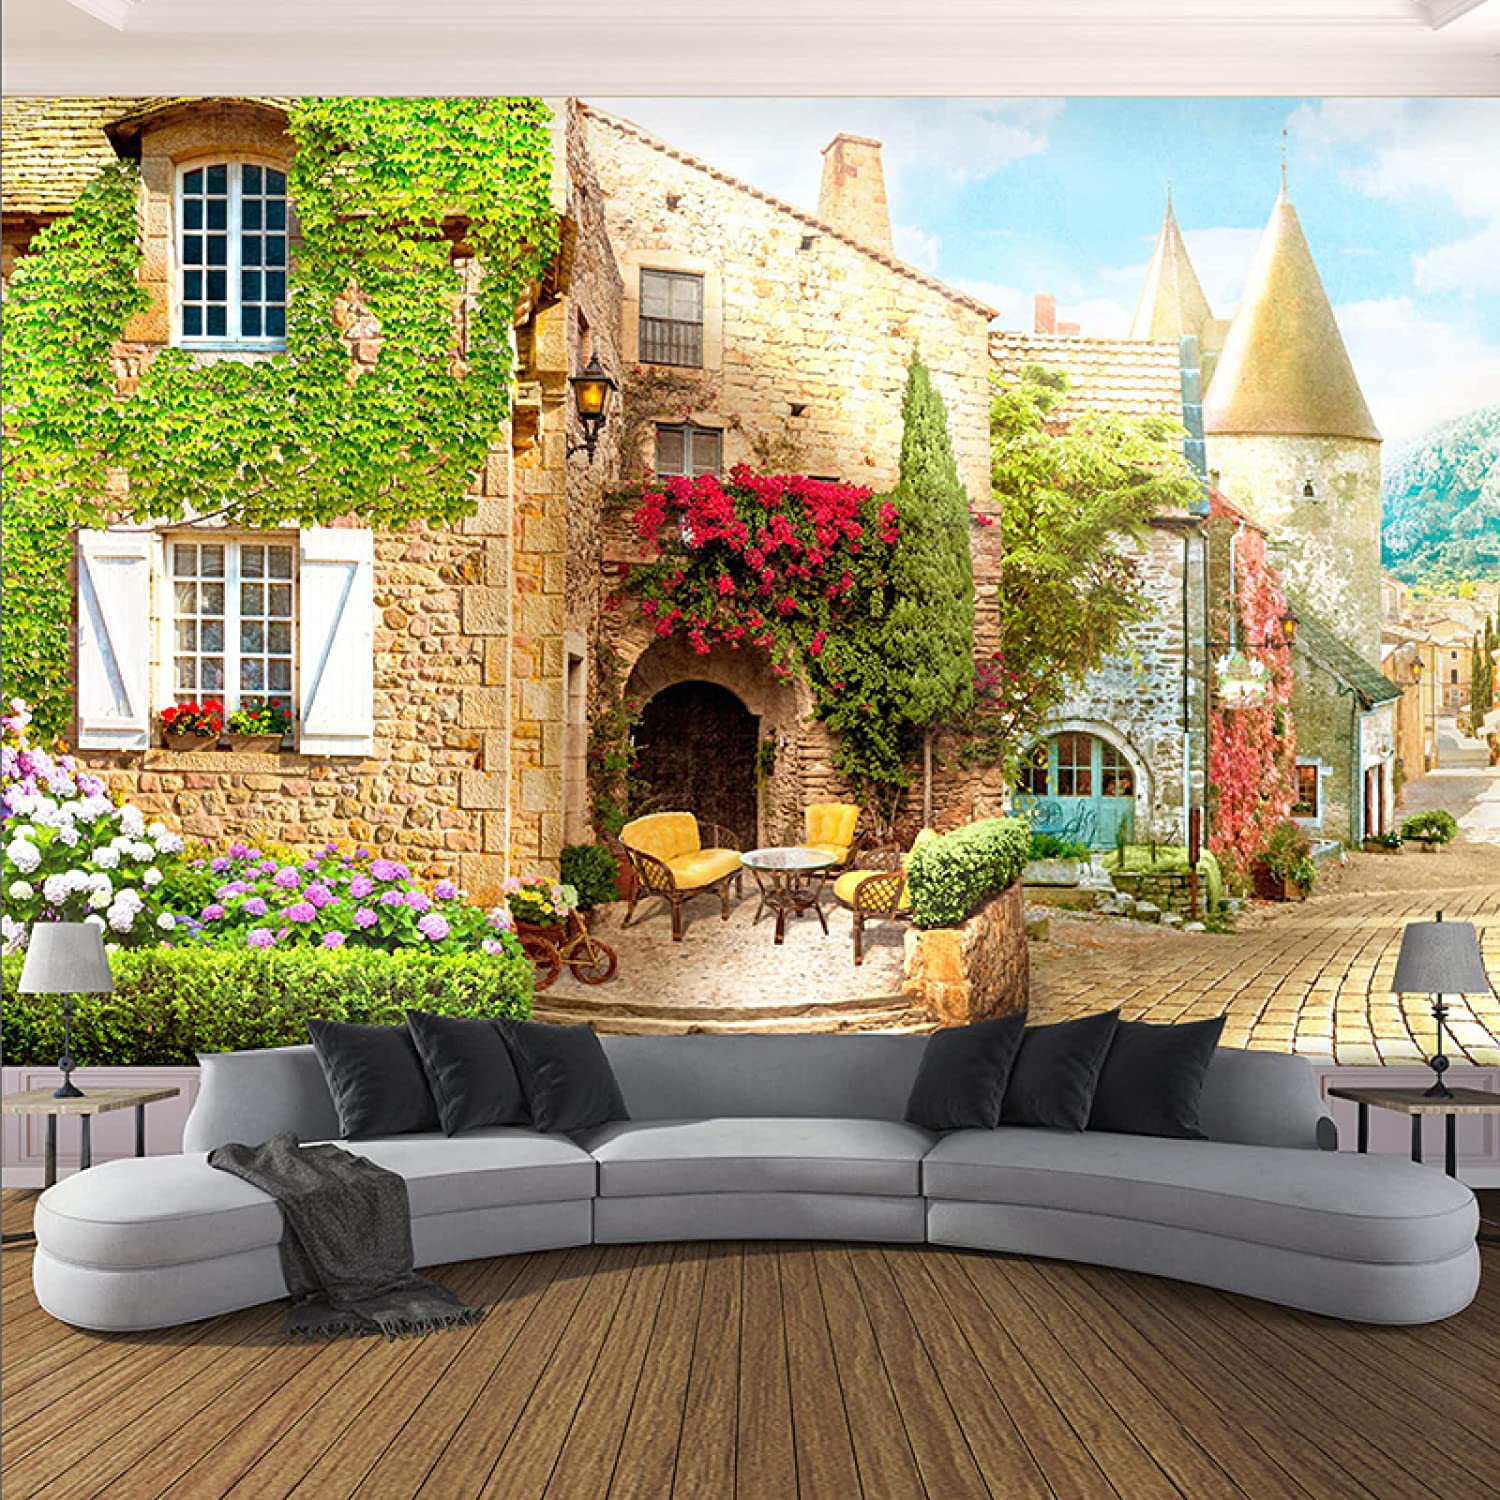 Flowers House Wallpapers